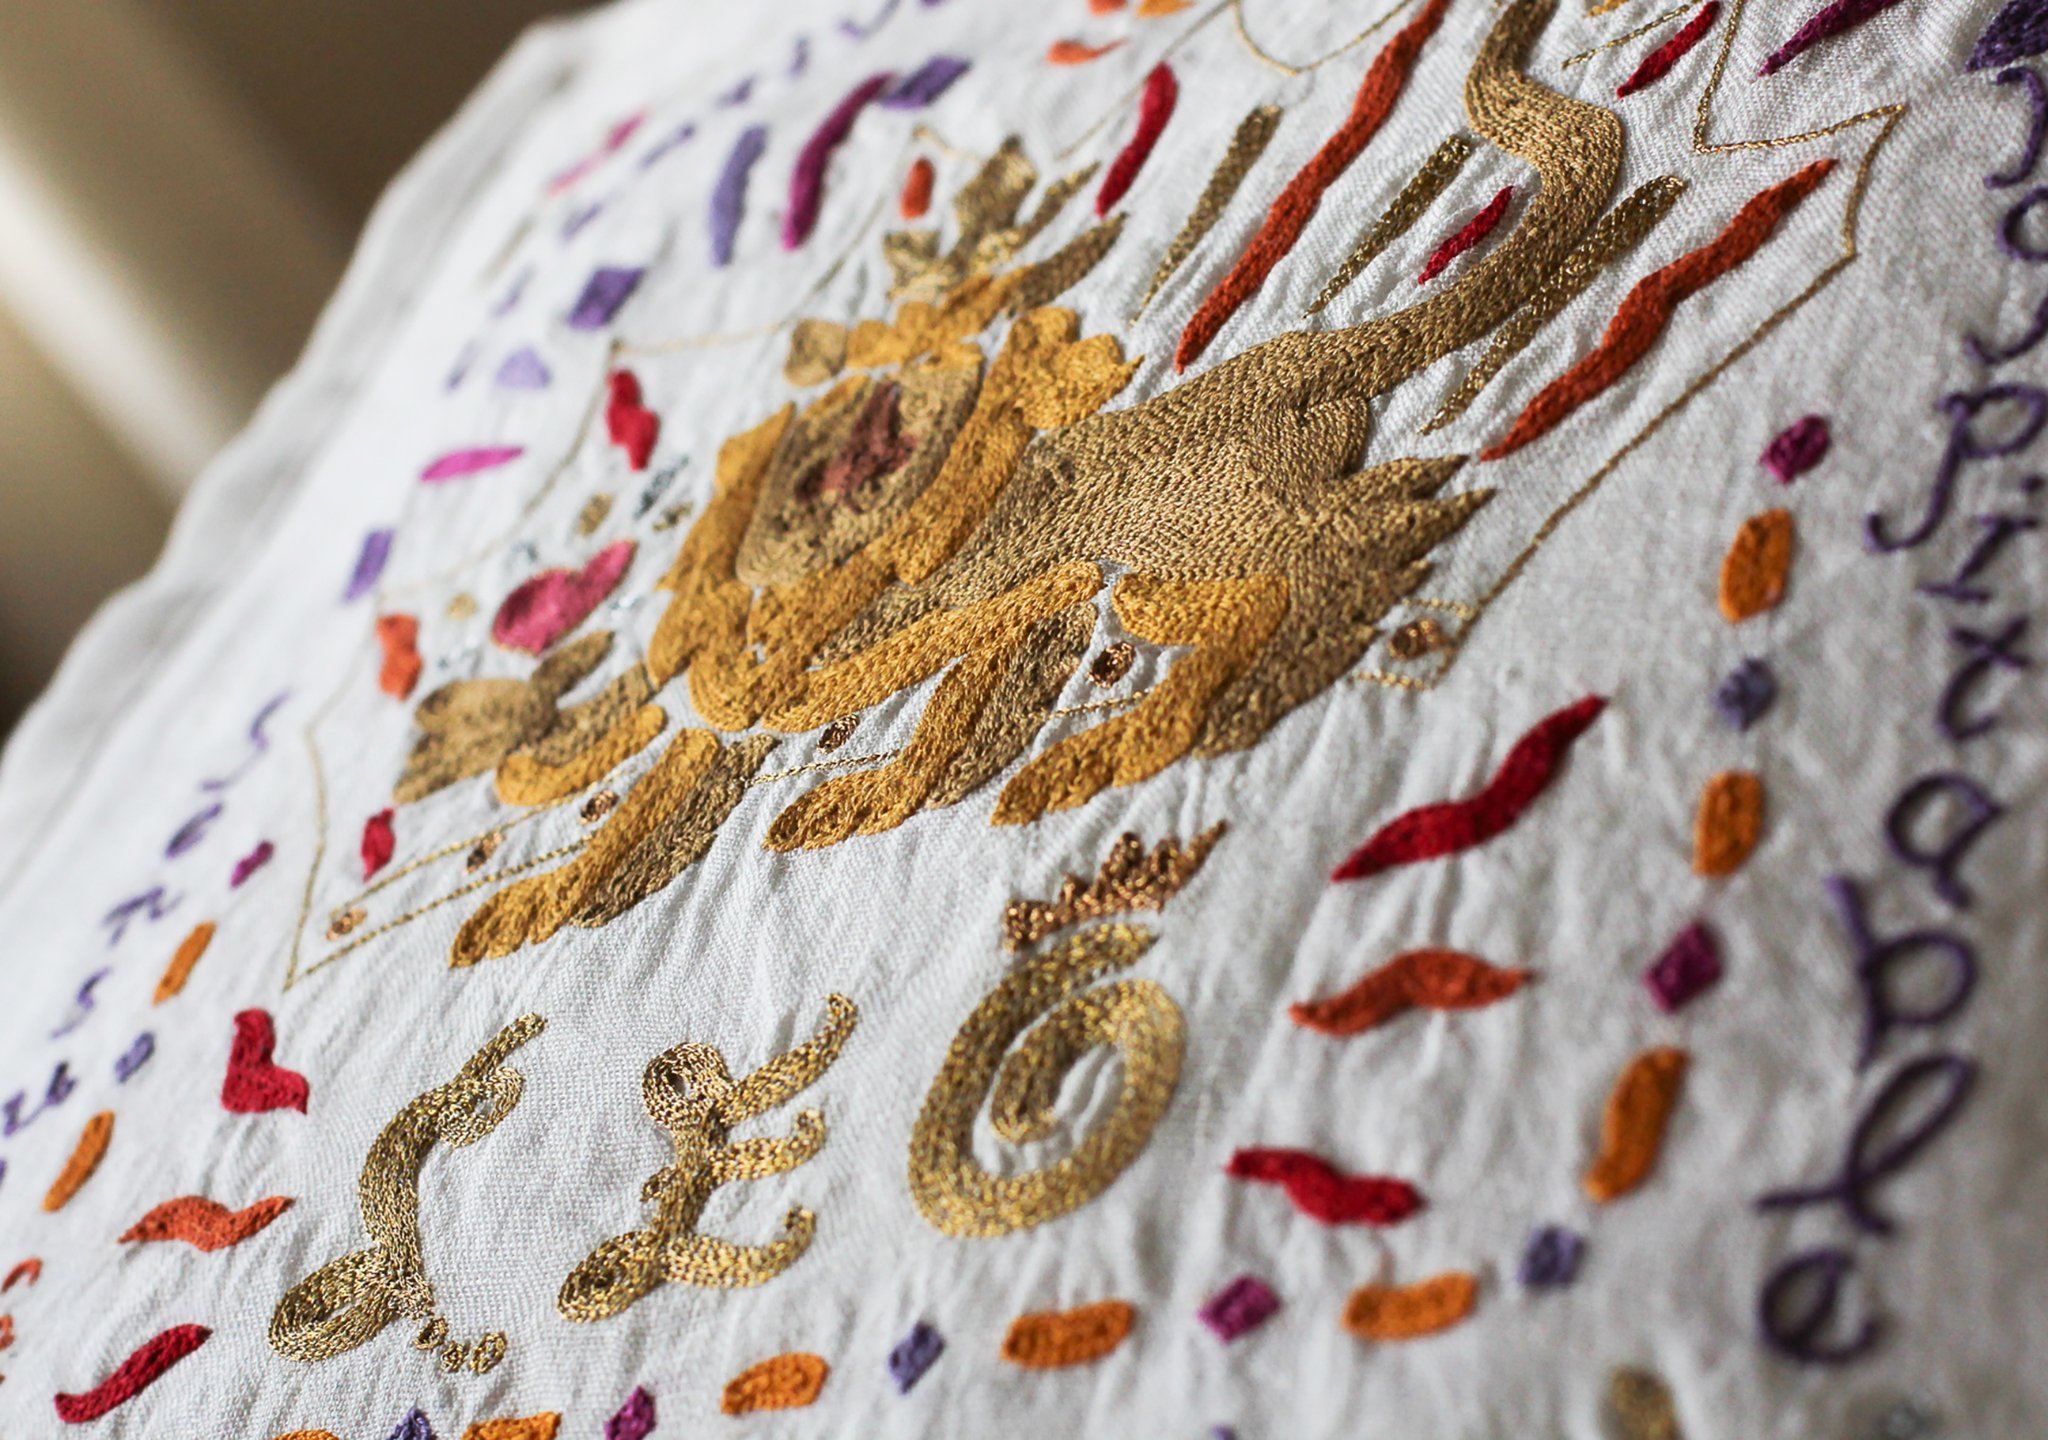 Leo Astrology Hand-Embroidered Pillow